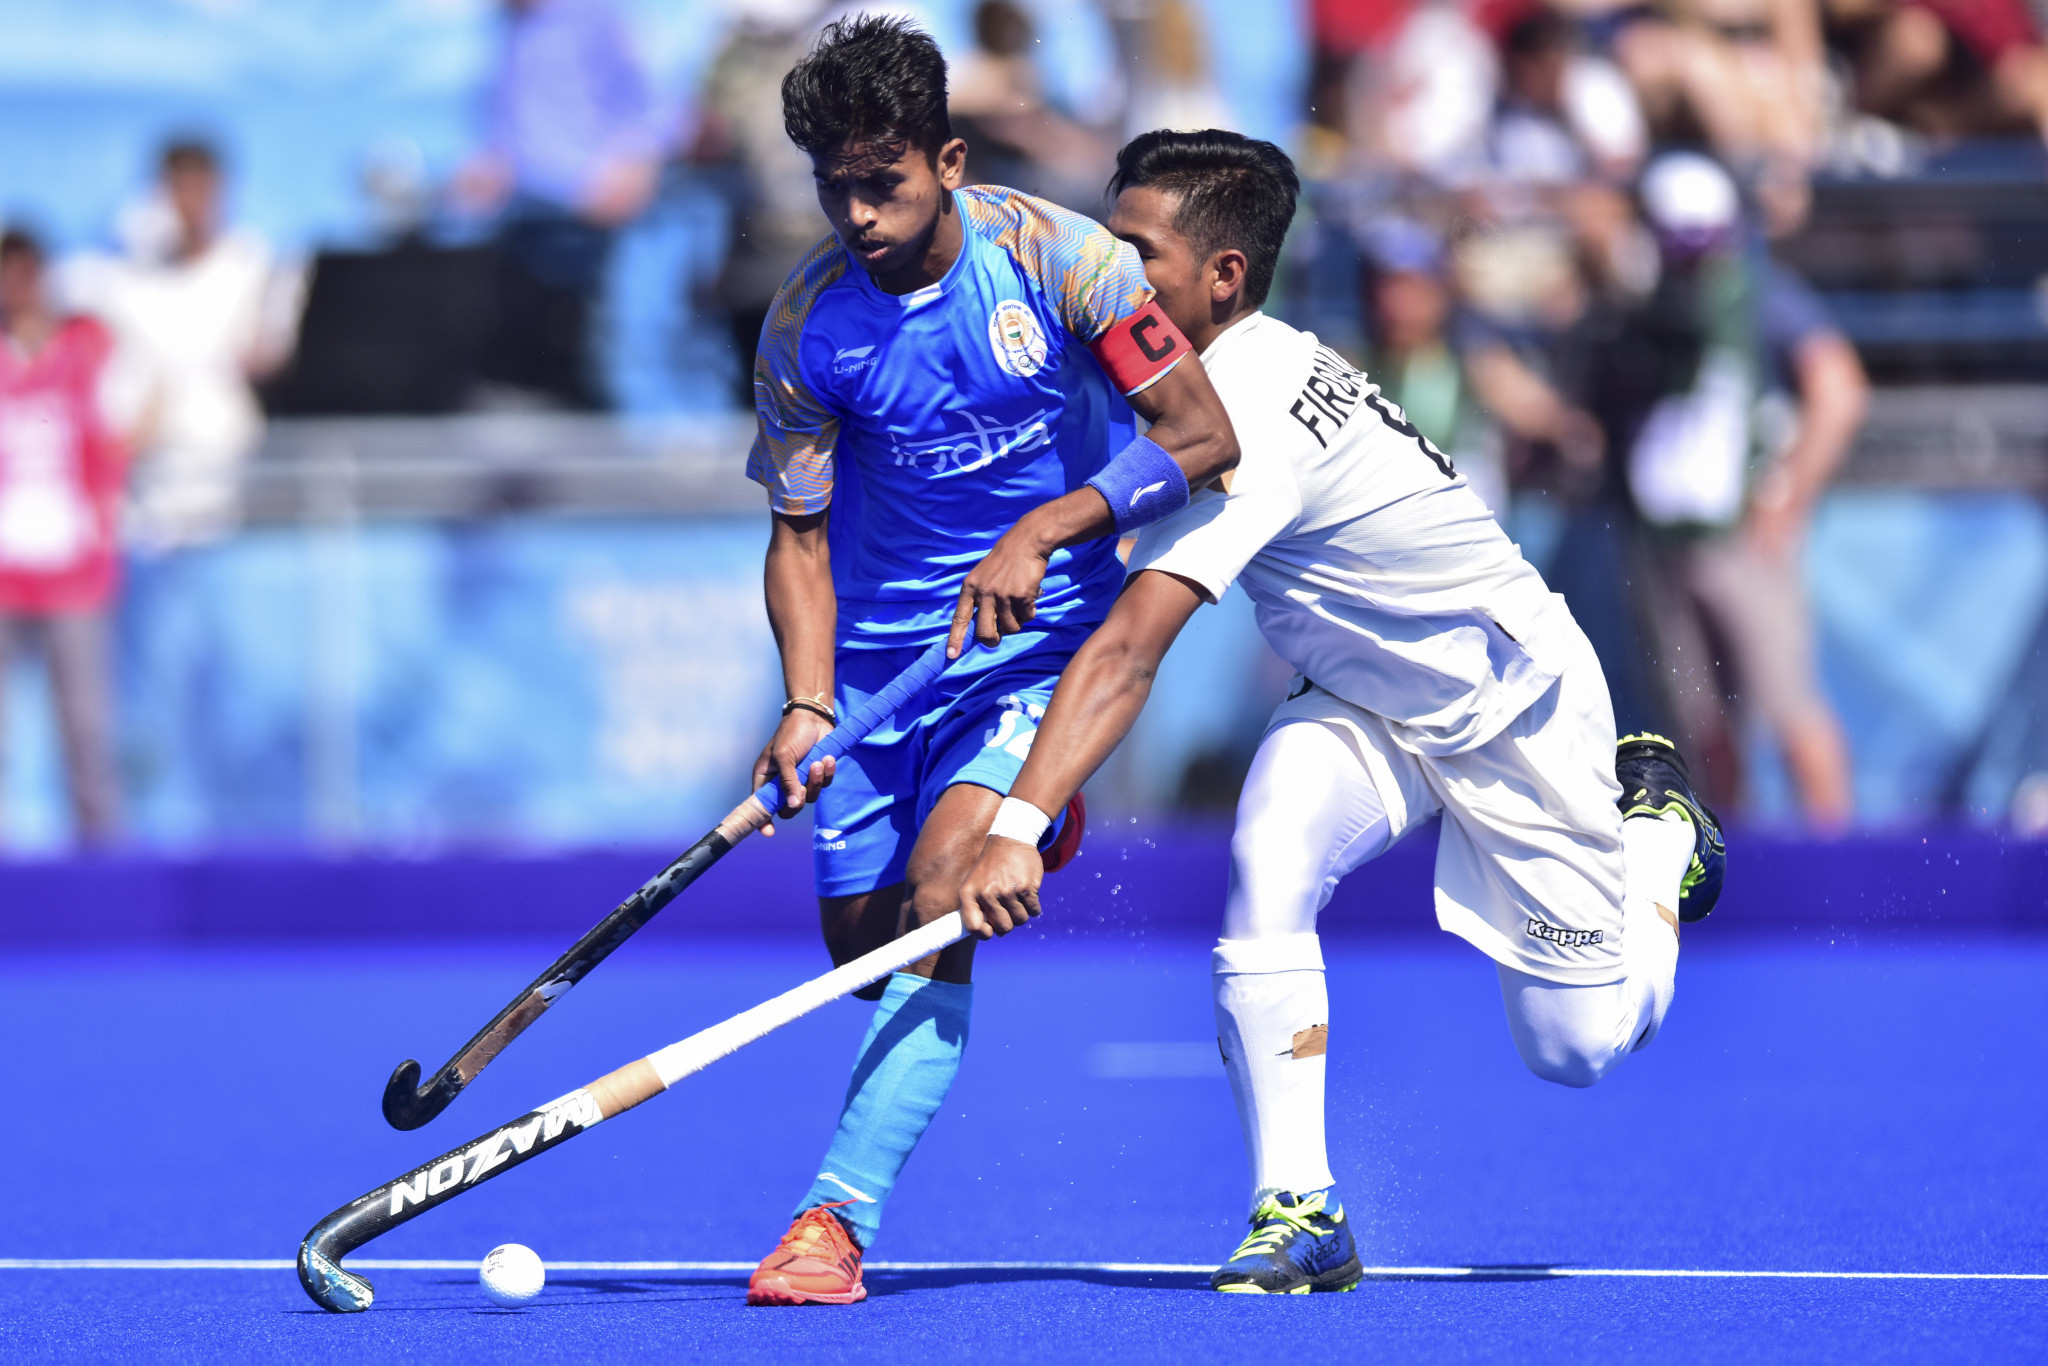 Vivek Prasad looks to be India's next hockey prodigy with nearly 60 caps already to his name ©Getty Images